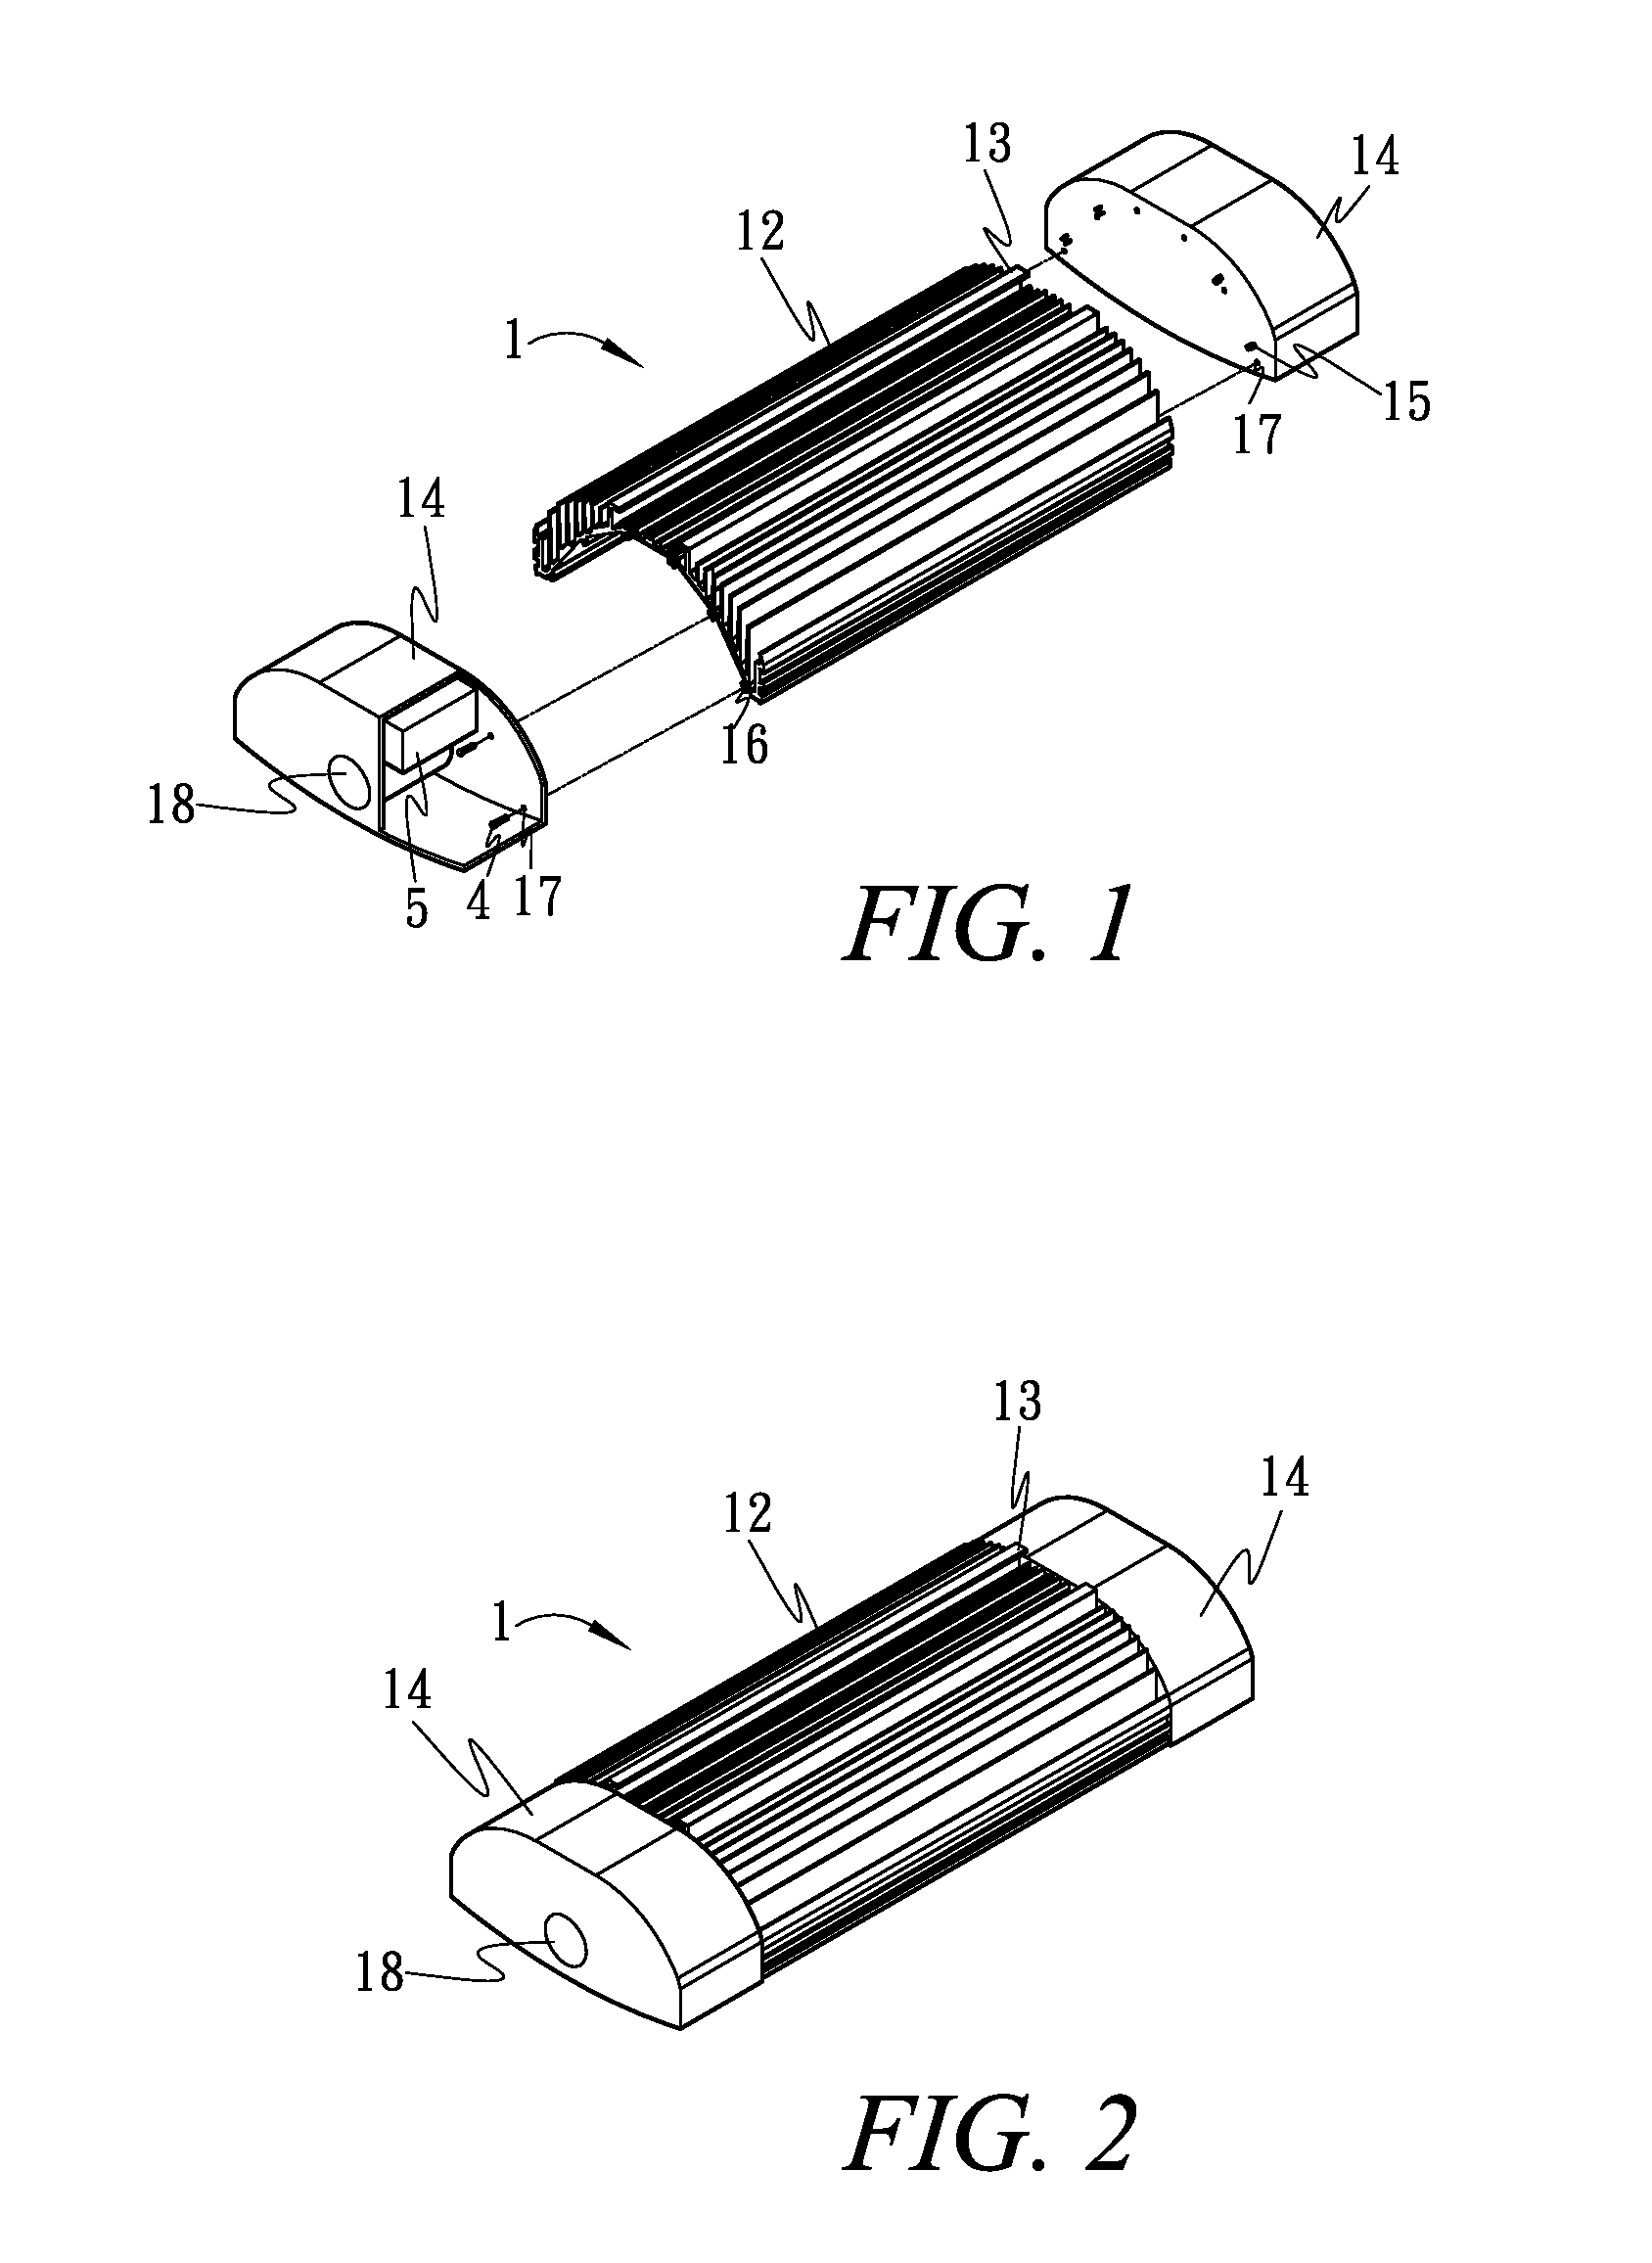 Roadside lamp with a heat dissipating design